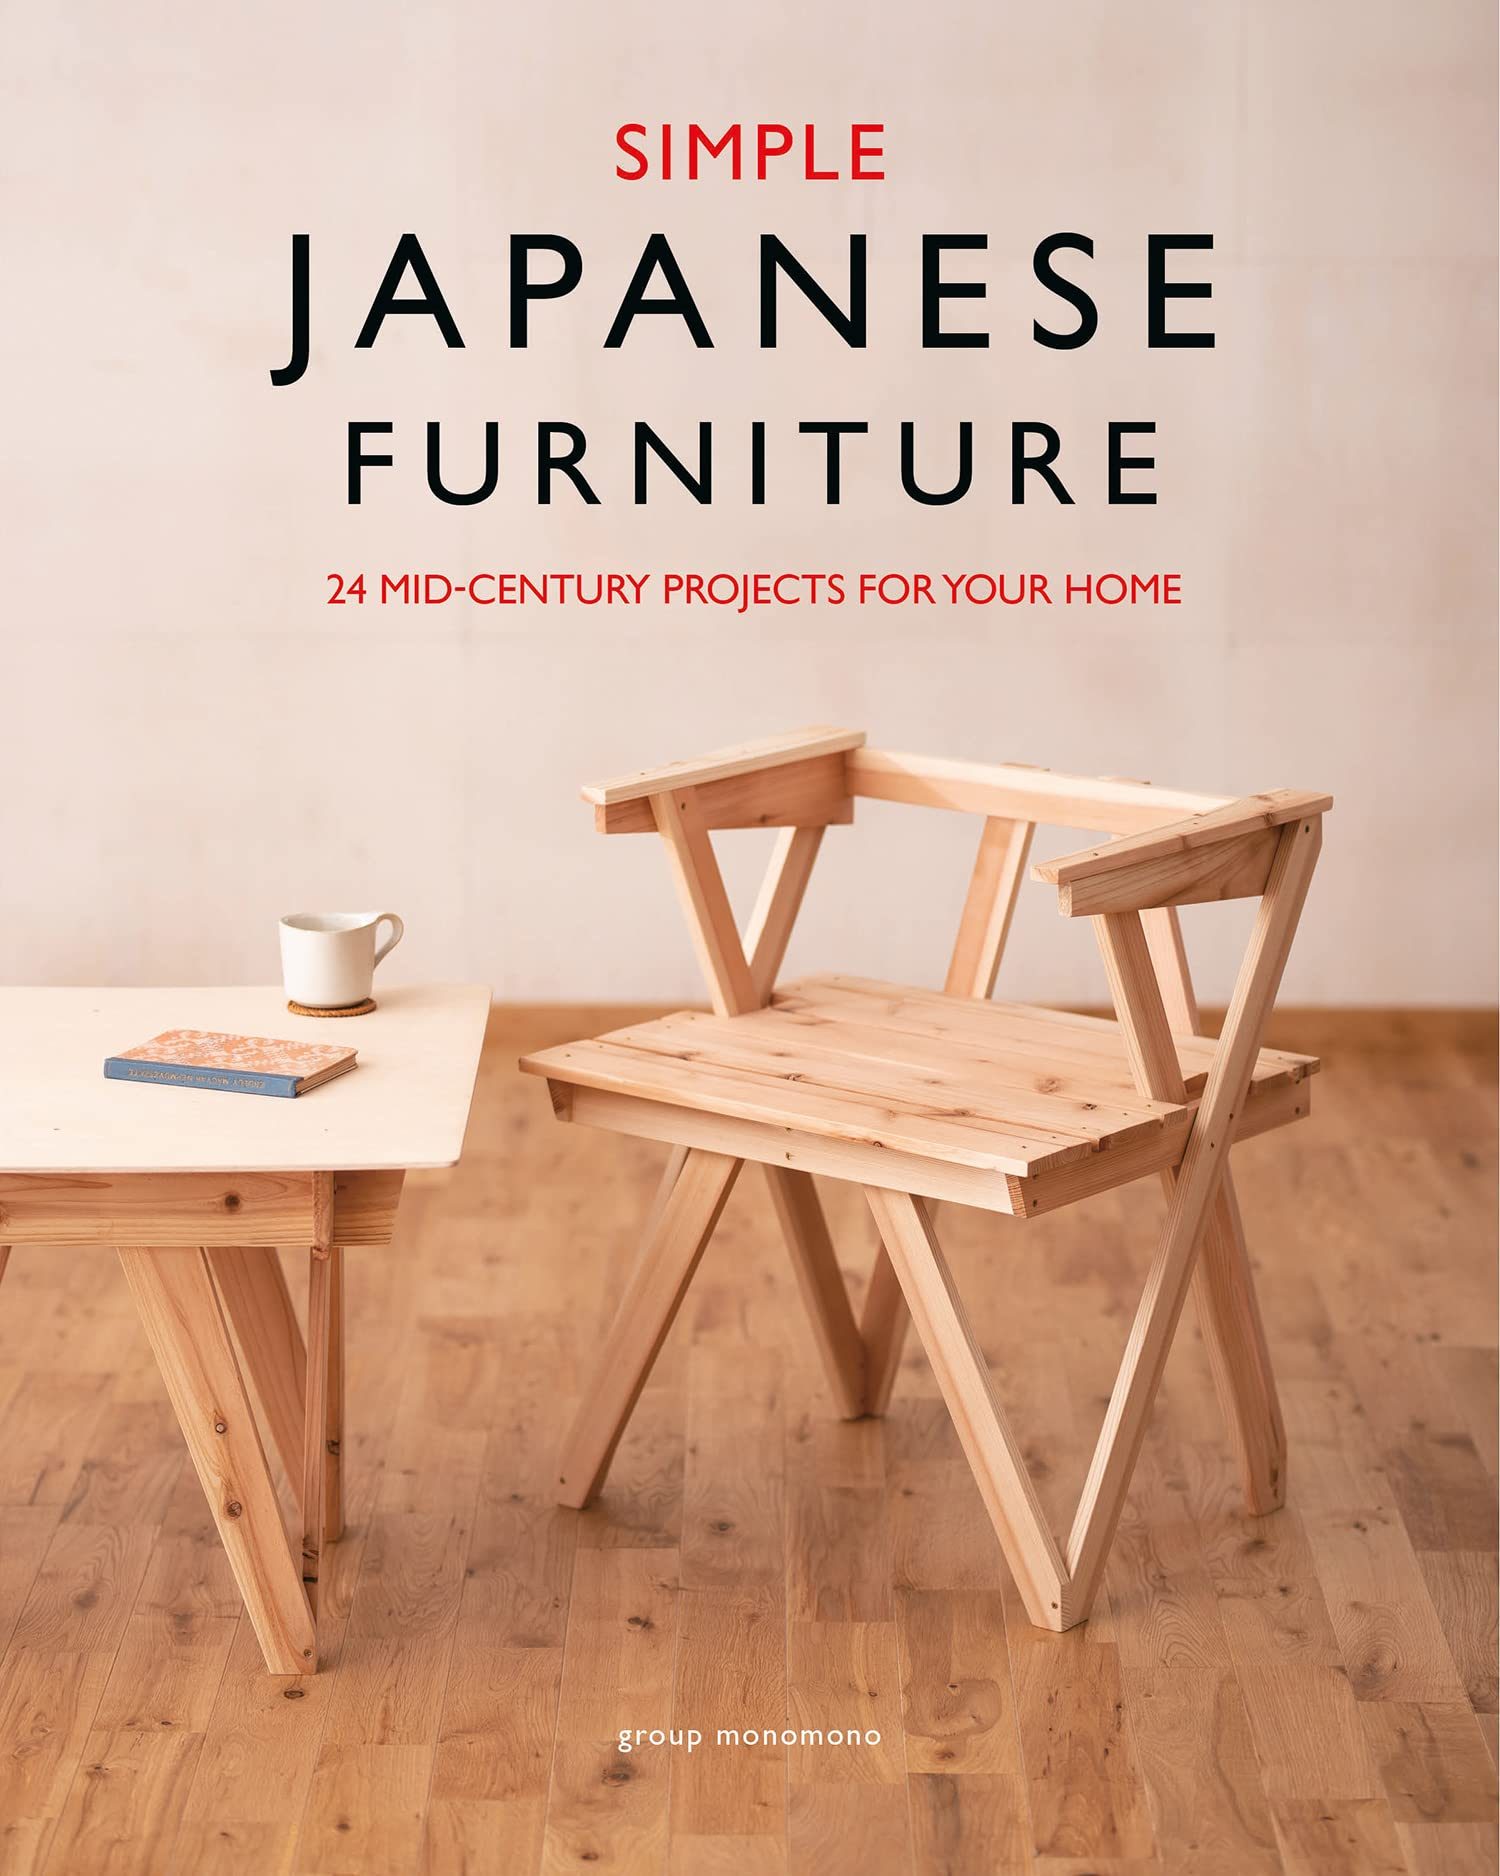 Woodworking　Furniture:　Yandles　Simple　Japanese　24　Projects　Classic　Step-By-Step　GMC　Publications